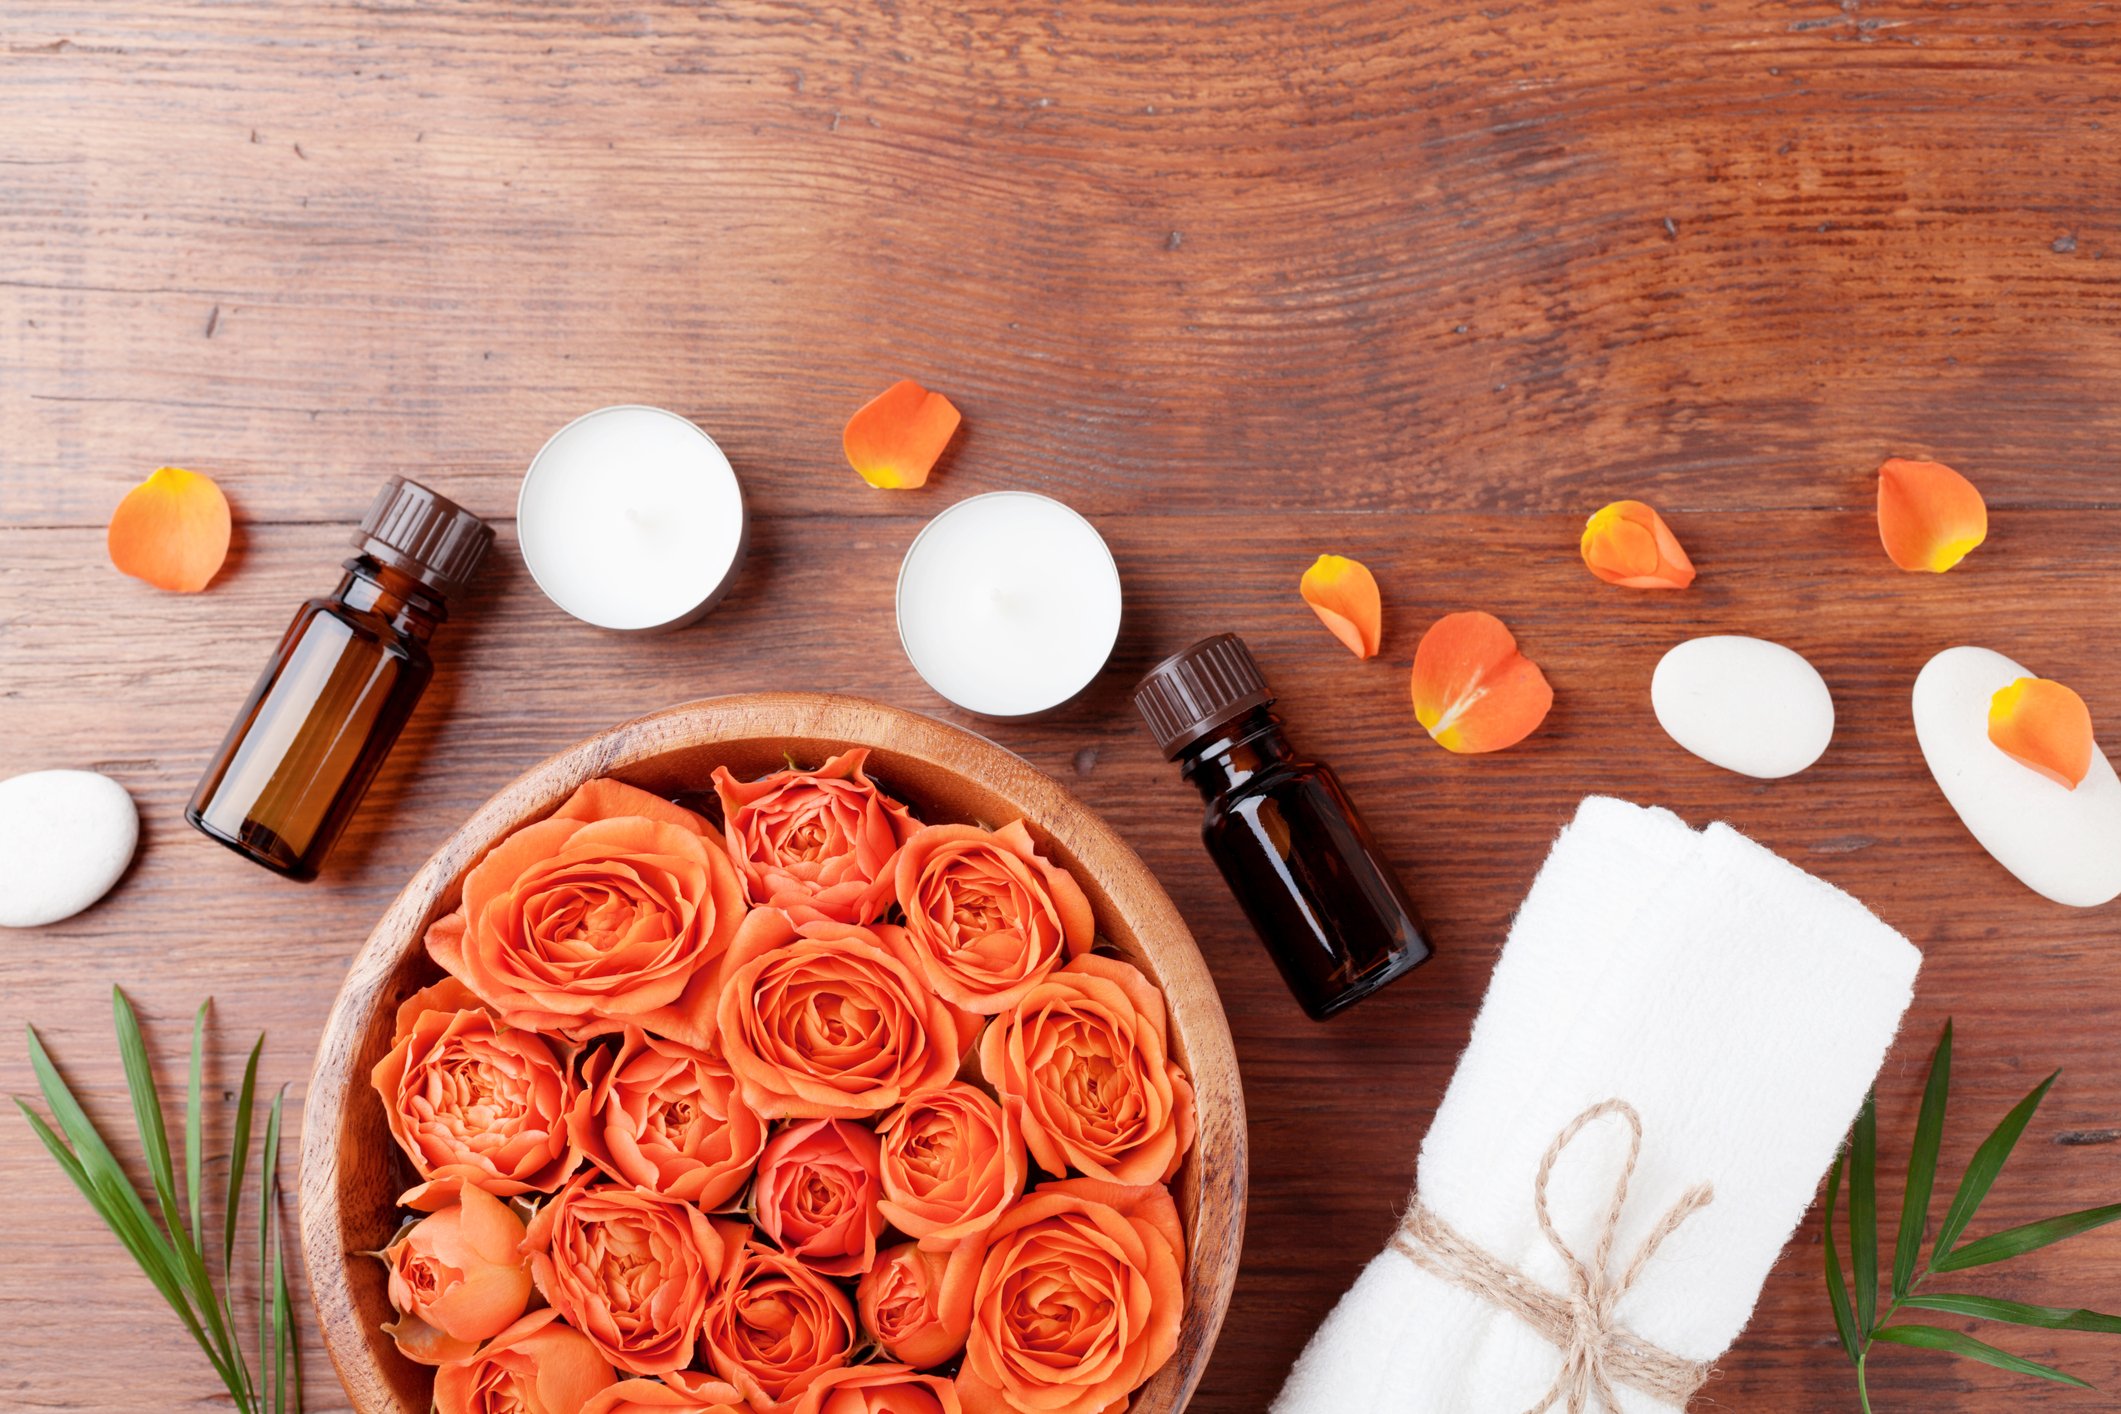 Types of Rose Oils – Sources of Rose to Obtain Essential Oil & Absolutes